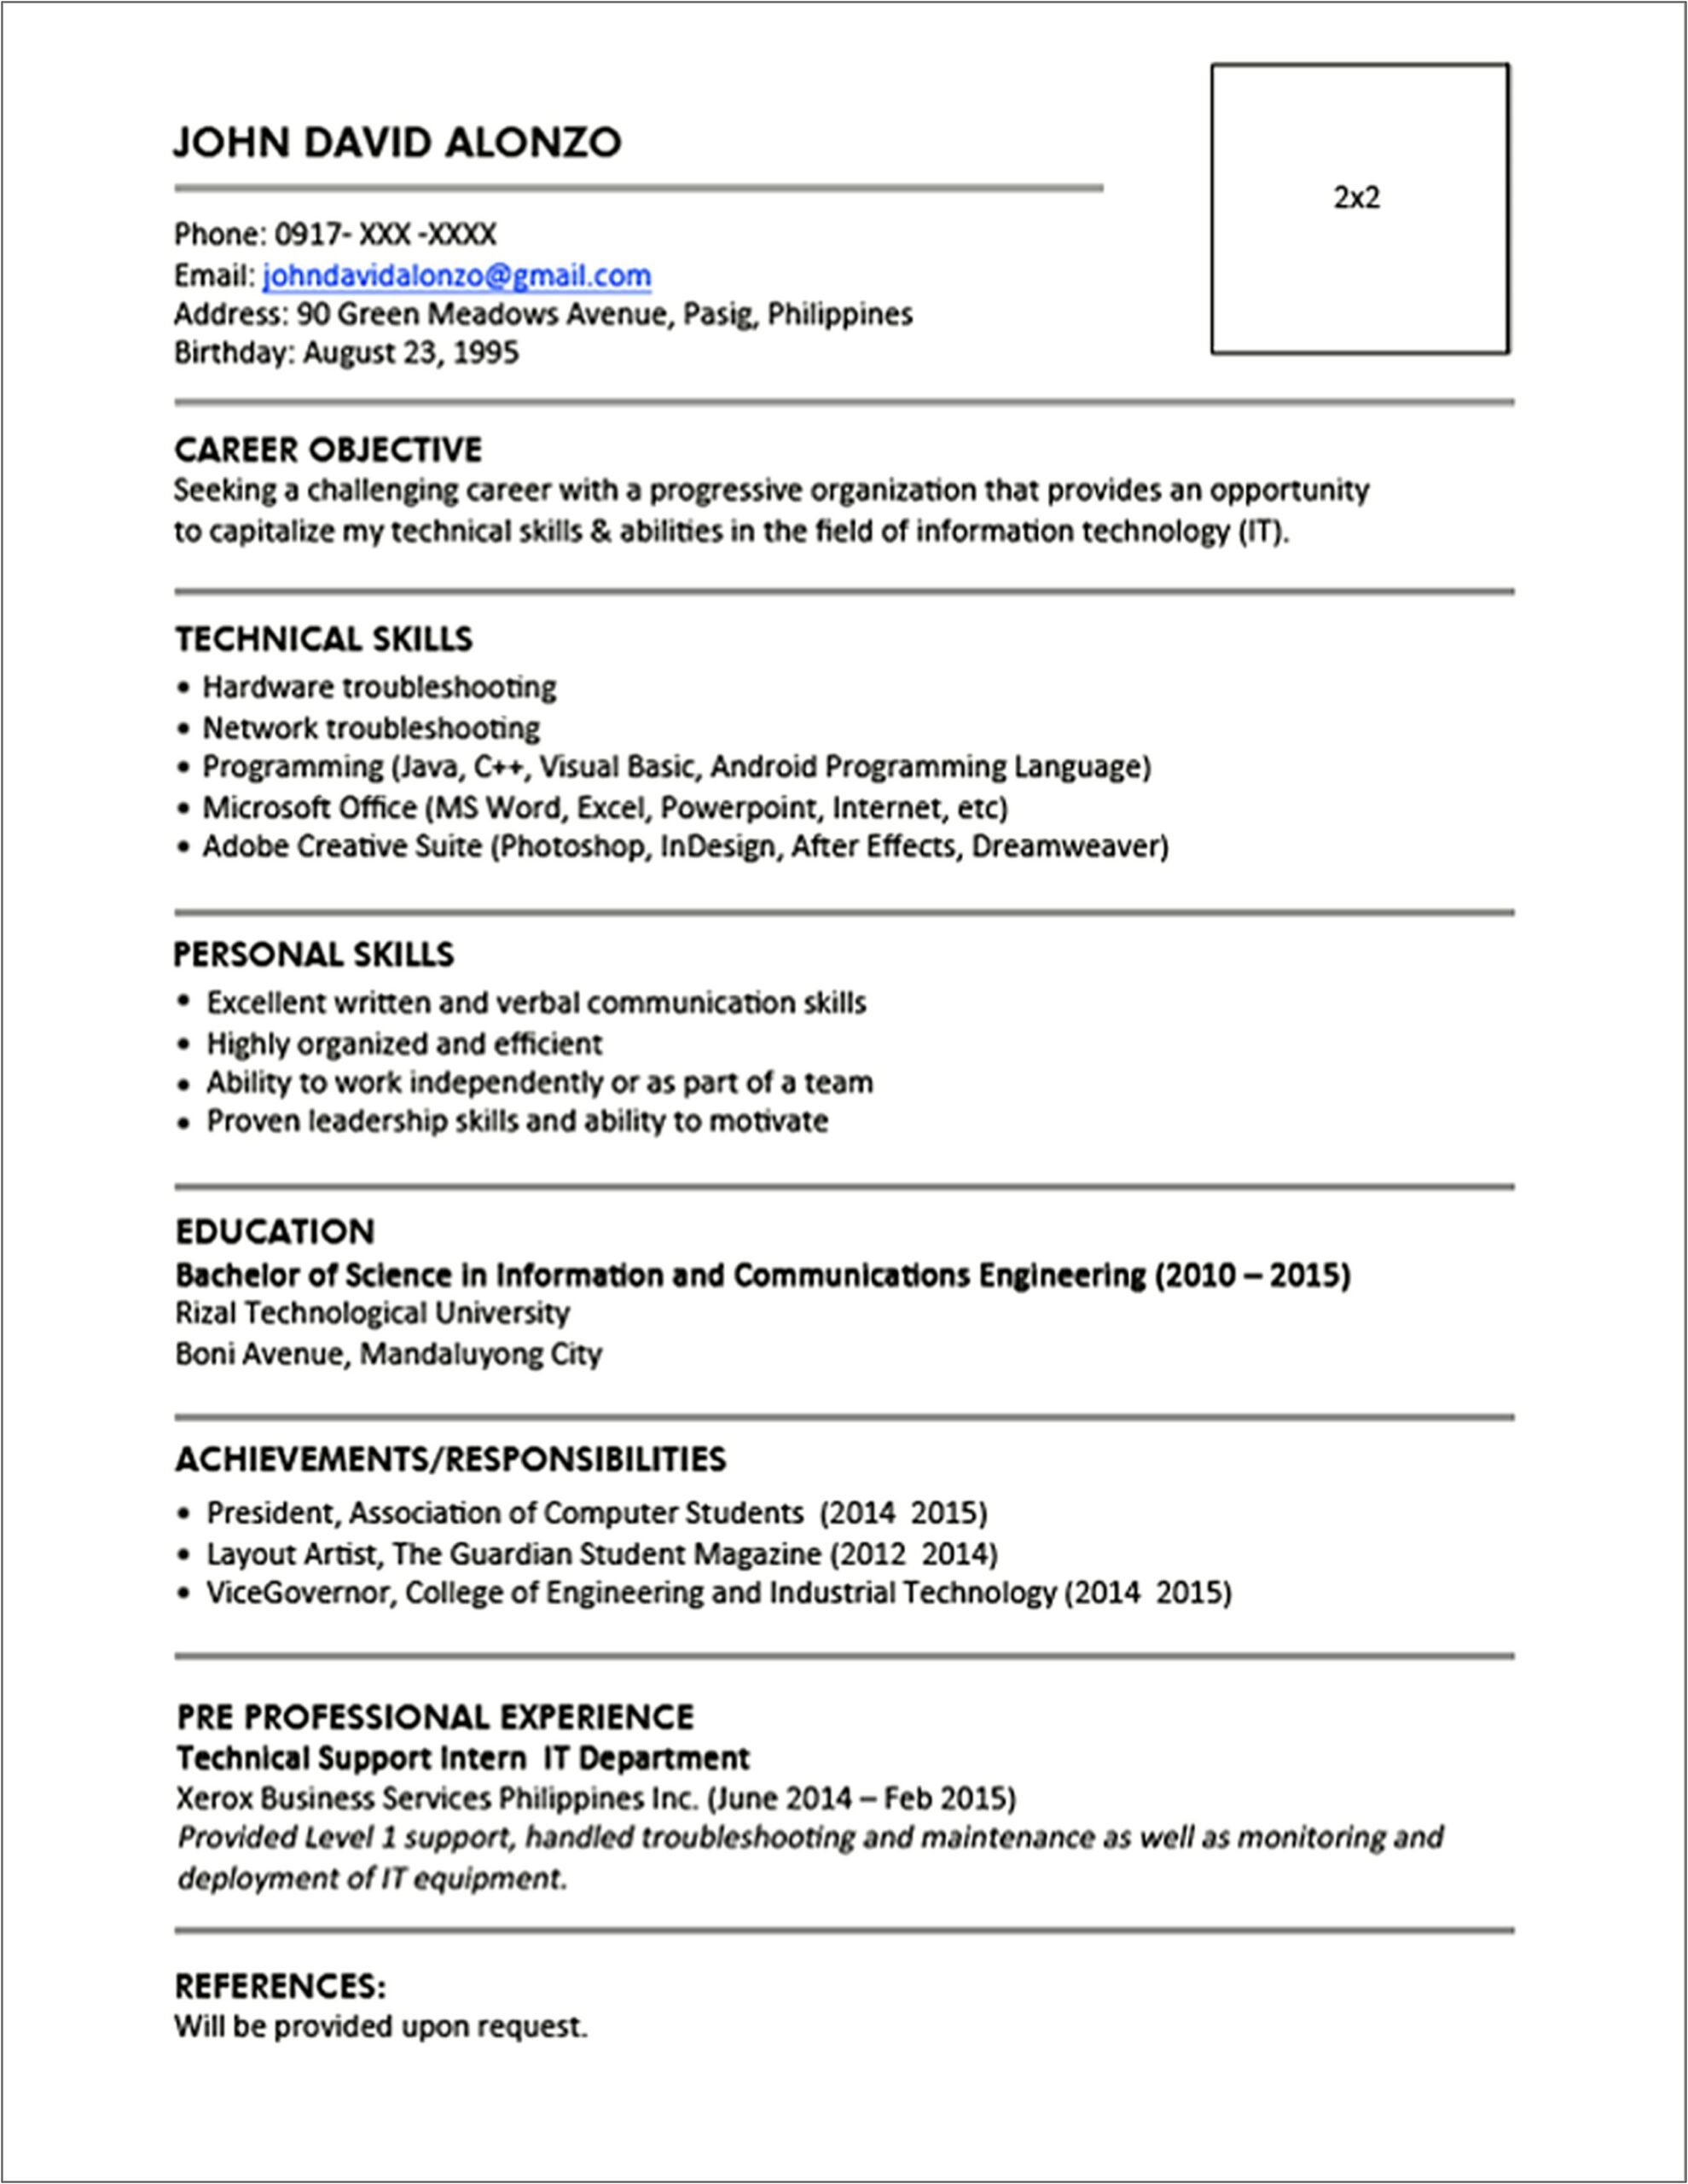 Sample Resume With A Personal Statement